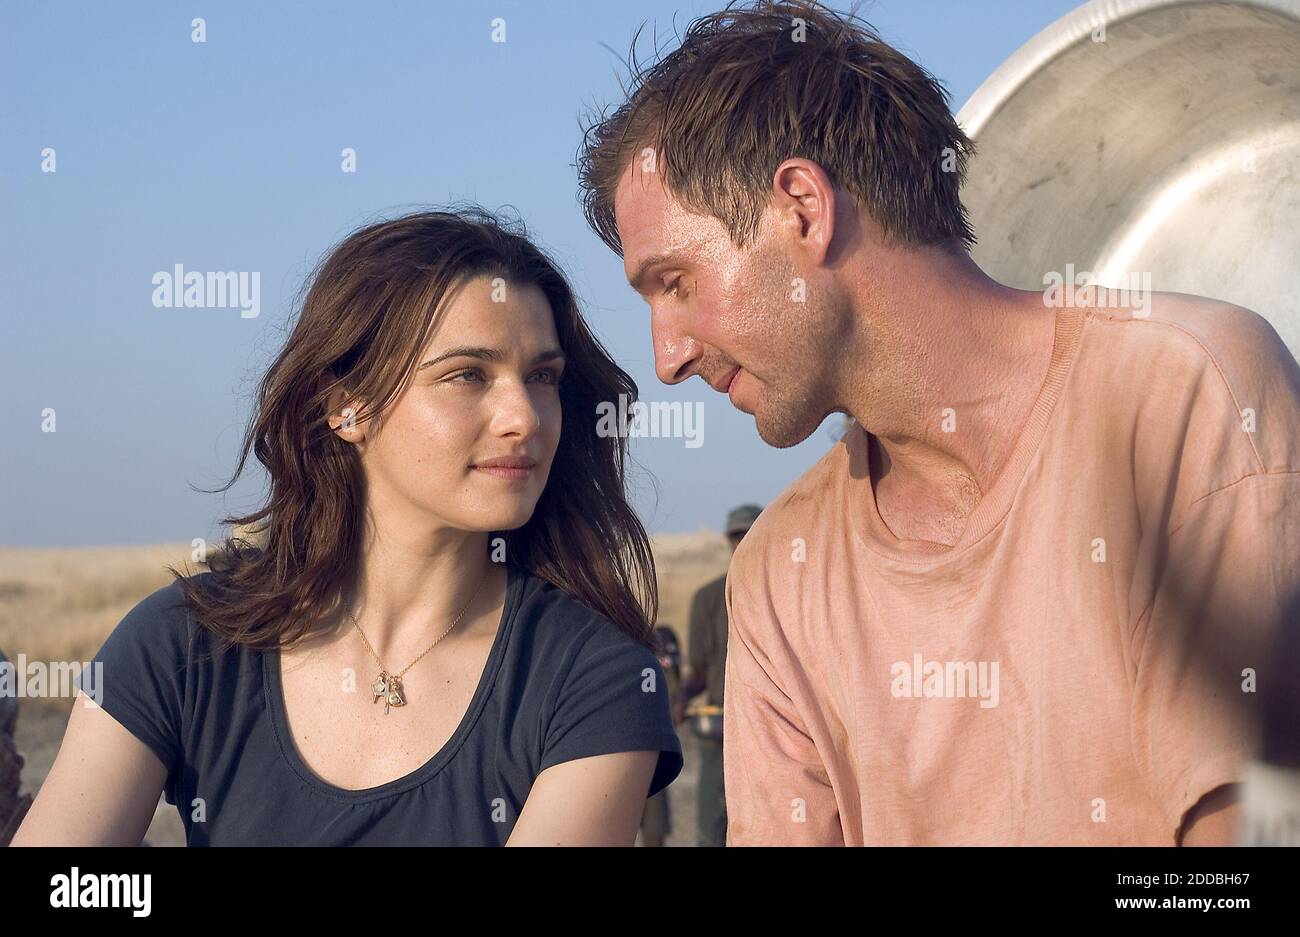 NO FILM, NO VIDEO, NO TV, NO DOCUMENTARY - Cast members Ralph Fiennes and Rachel Weisz during the filming of Fernando Meirelles's film 'The Constant Gardener', based on the John le Carre novel, in 2005. Photo by Jaap Buitendijk/Focus Features/KRT/ABACAPRESS.COM Stock Photo